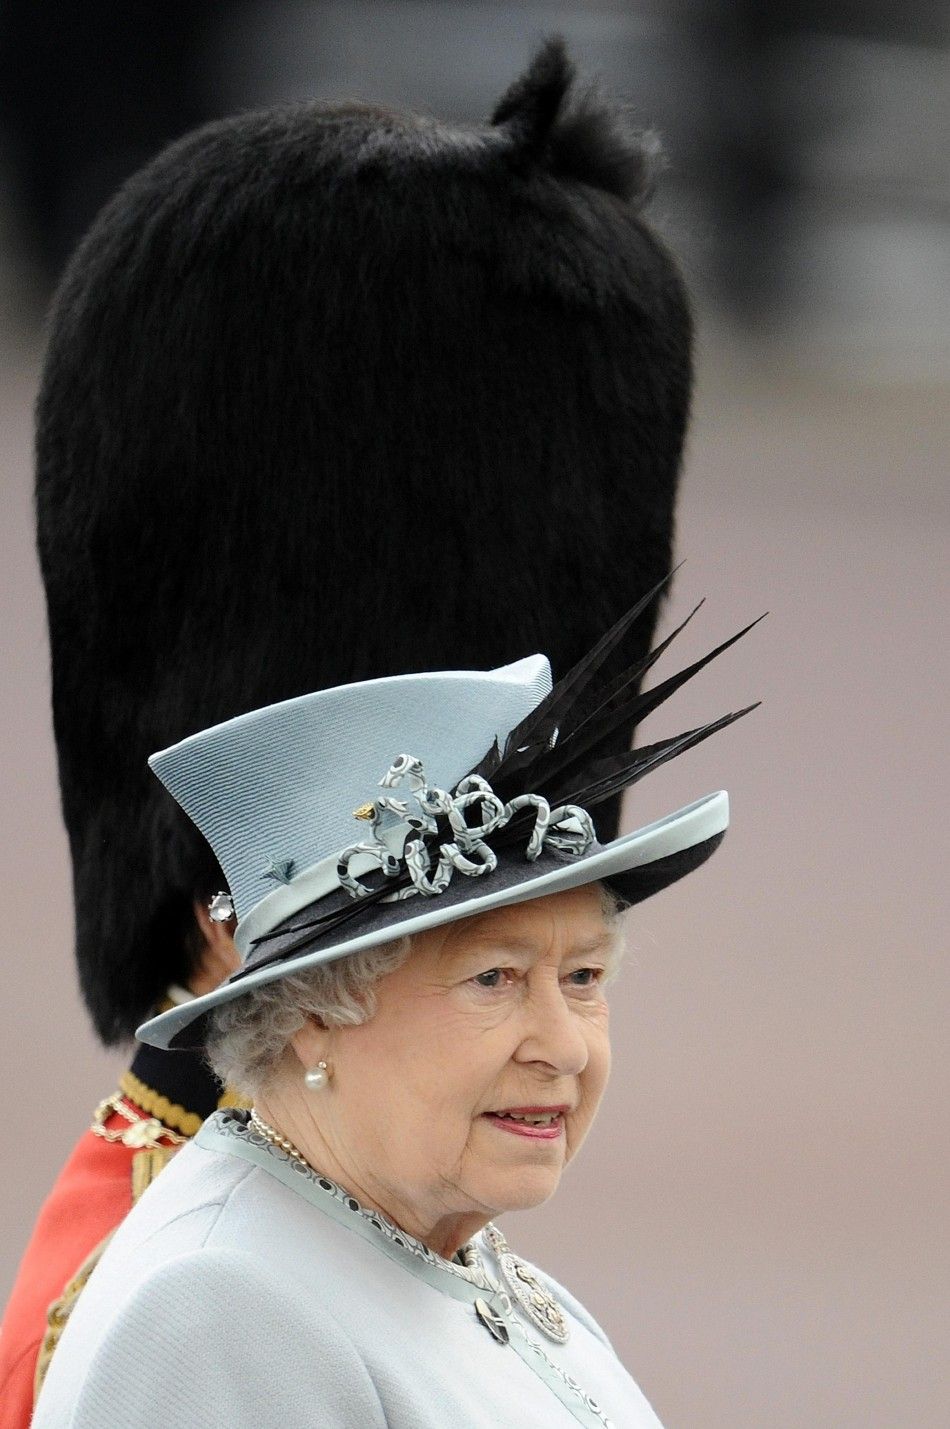 Stunning Kate Middleton celebrates Trooping the Colour in regal style.